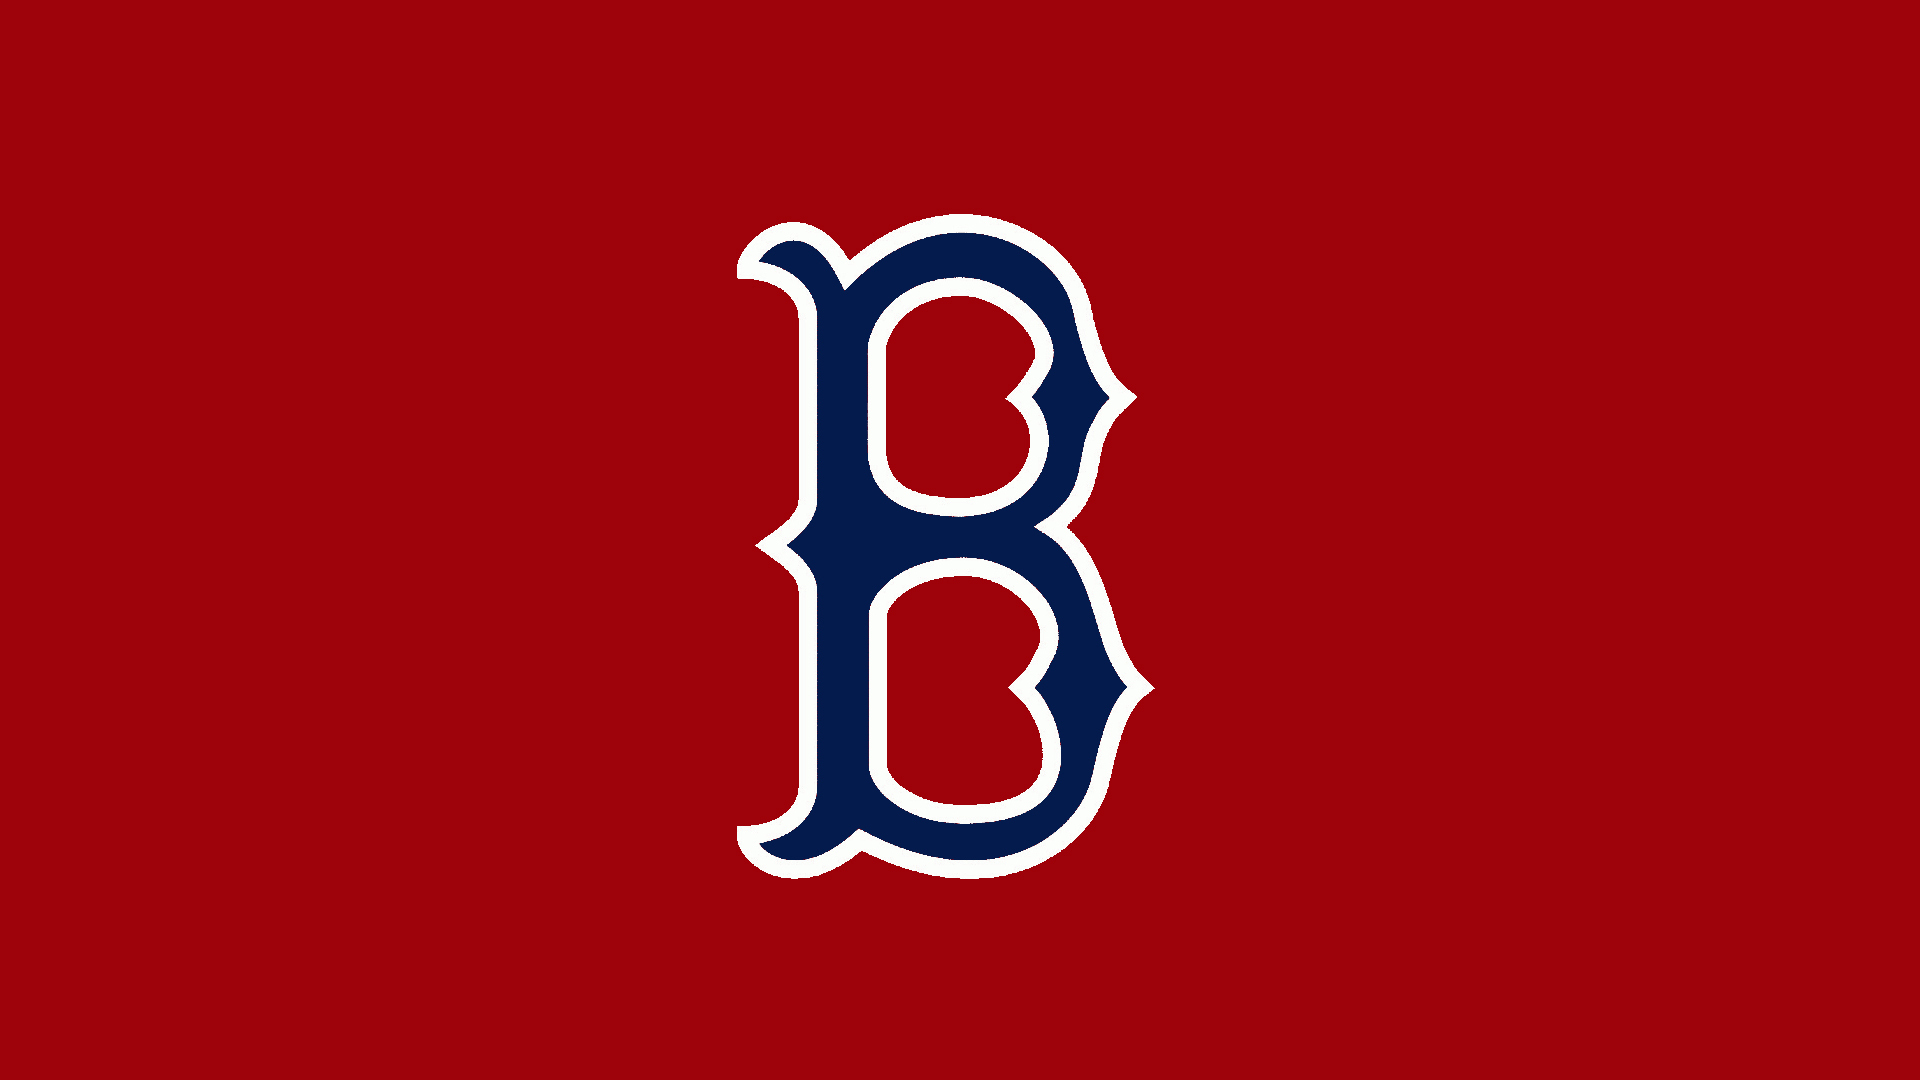 Free Sox Logo Jpg, Download Free Red Sox Jpg png images, Free ClipArts Clipart Library